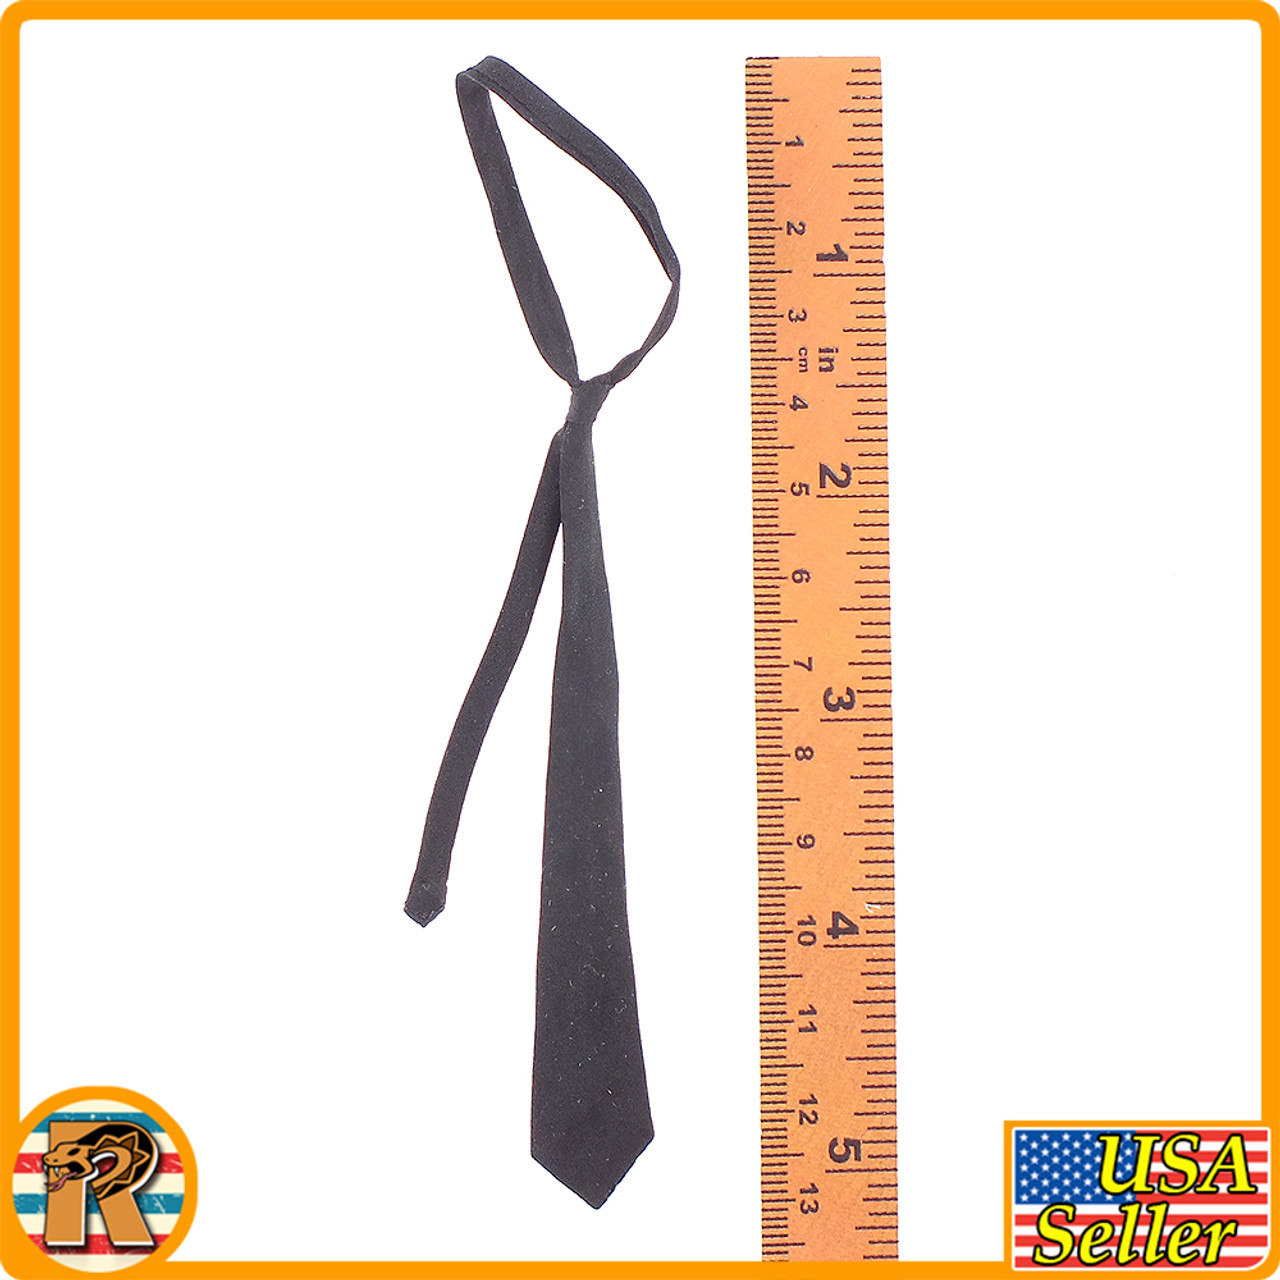 Michael Chicago Gangster 3 - Neck Tie #1 - 1/6 Scale -